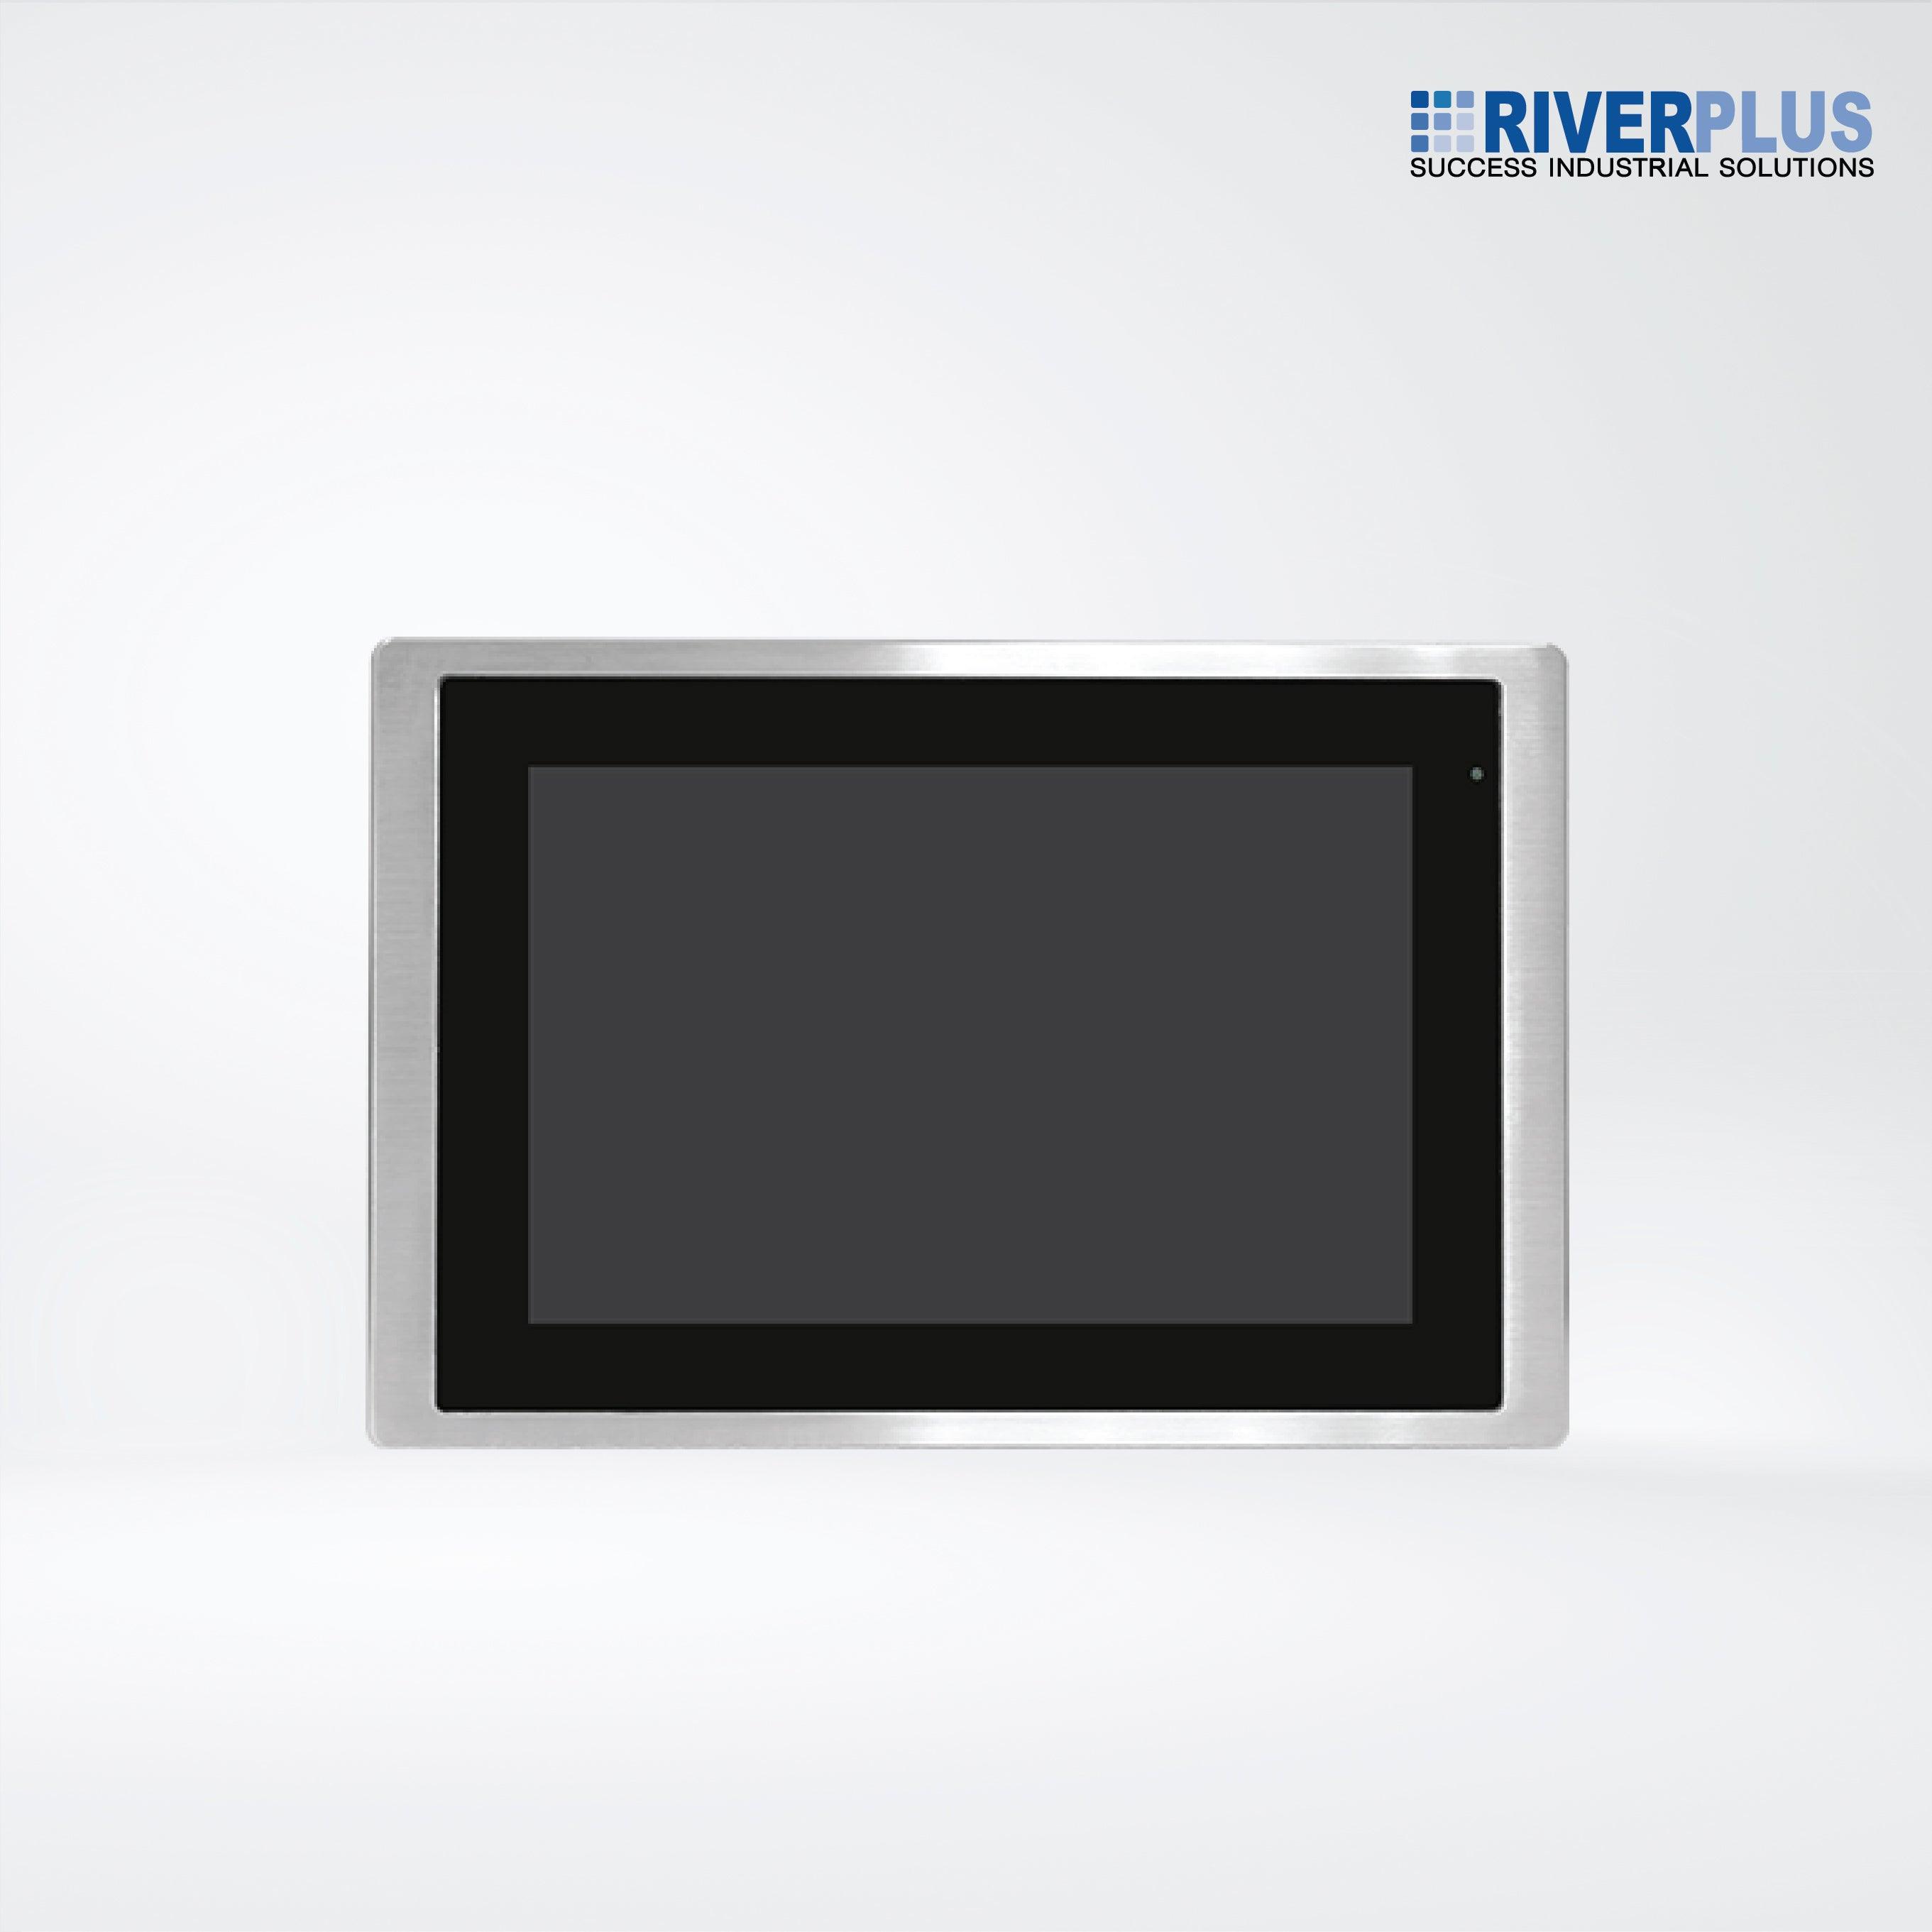 FABS-110RH 10.1” Flat Front Panel IP66 Stainless Chassis Display - Riverplus